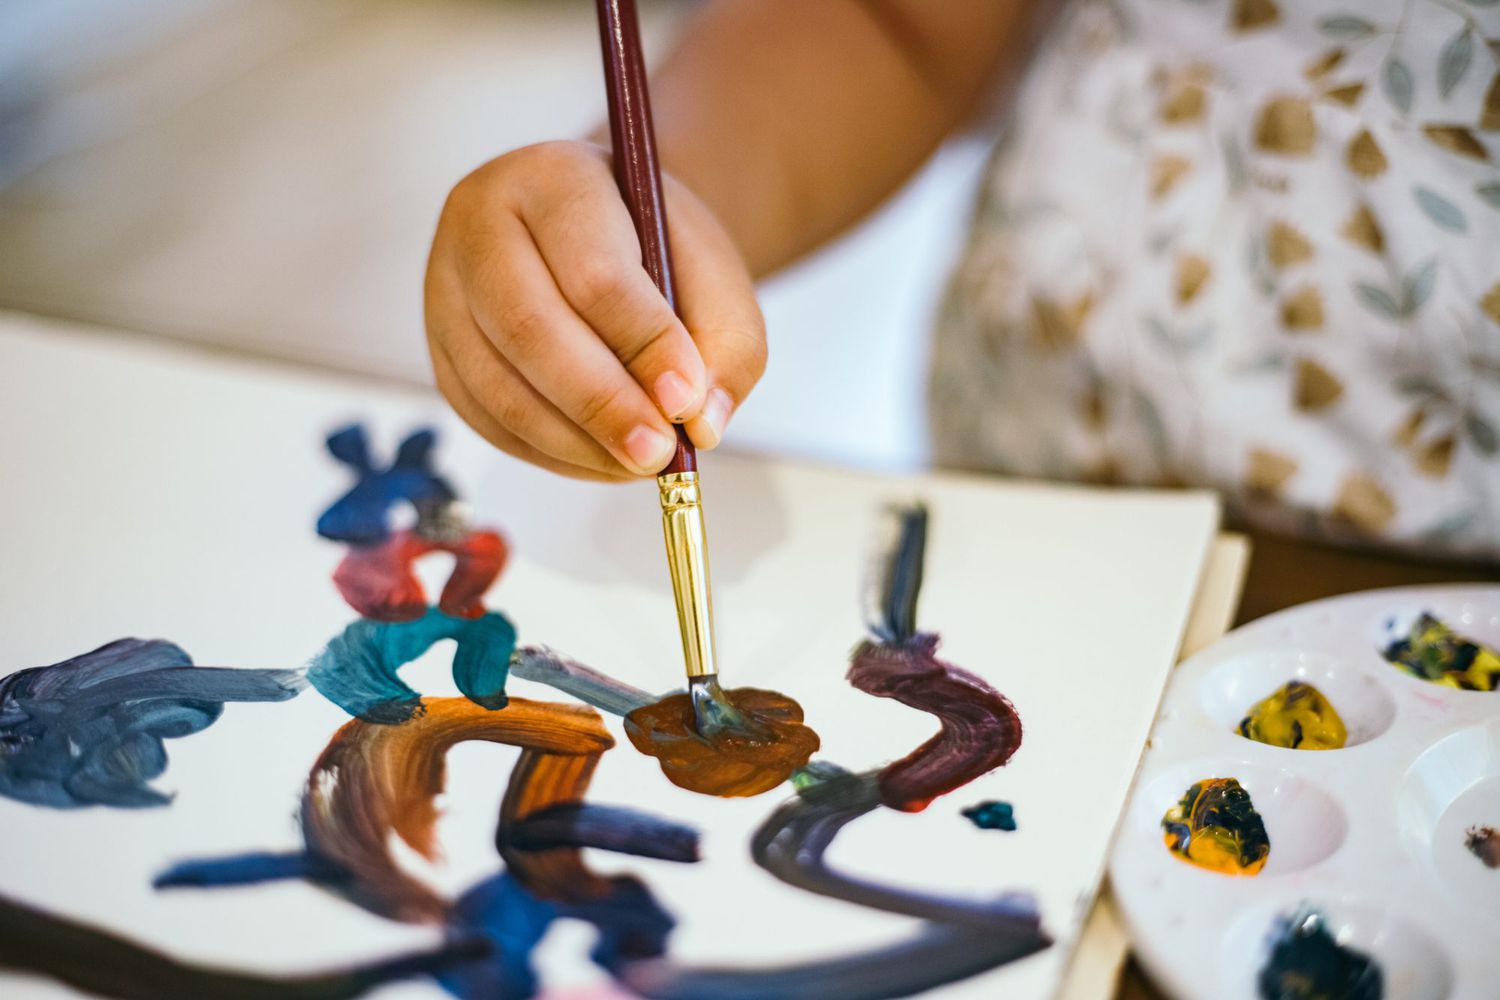 An image of a toddler painting.